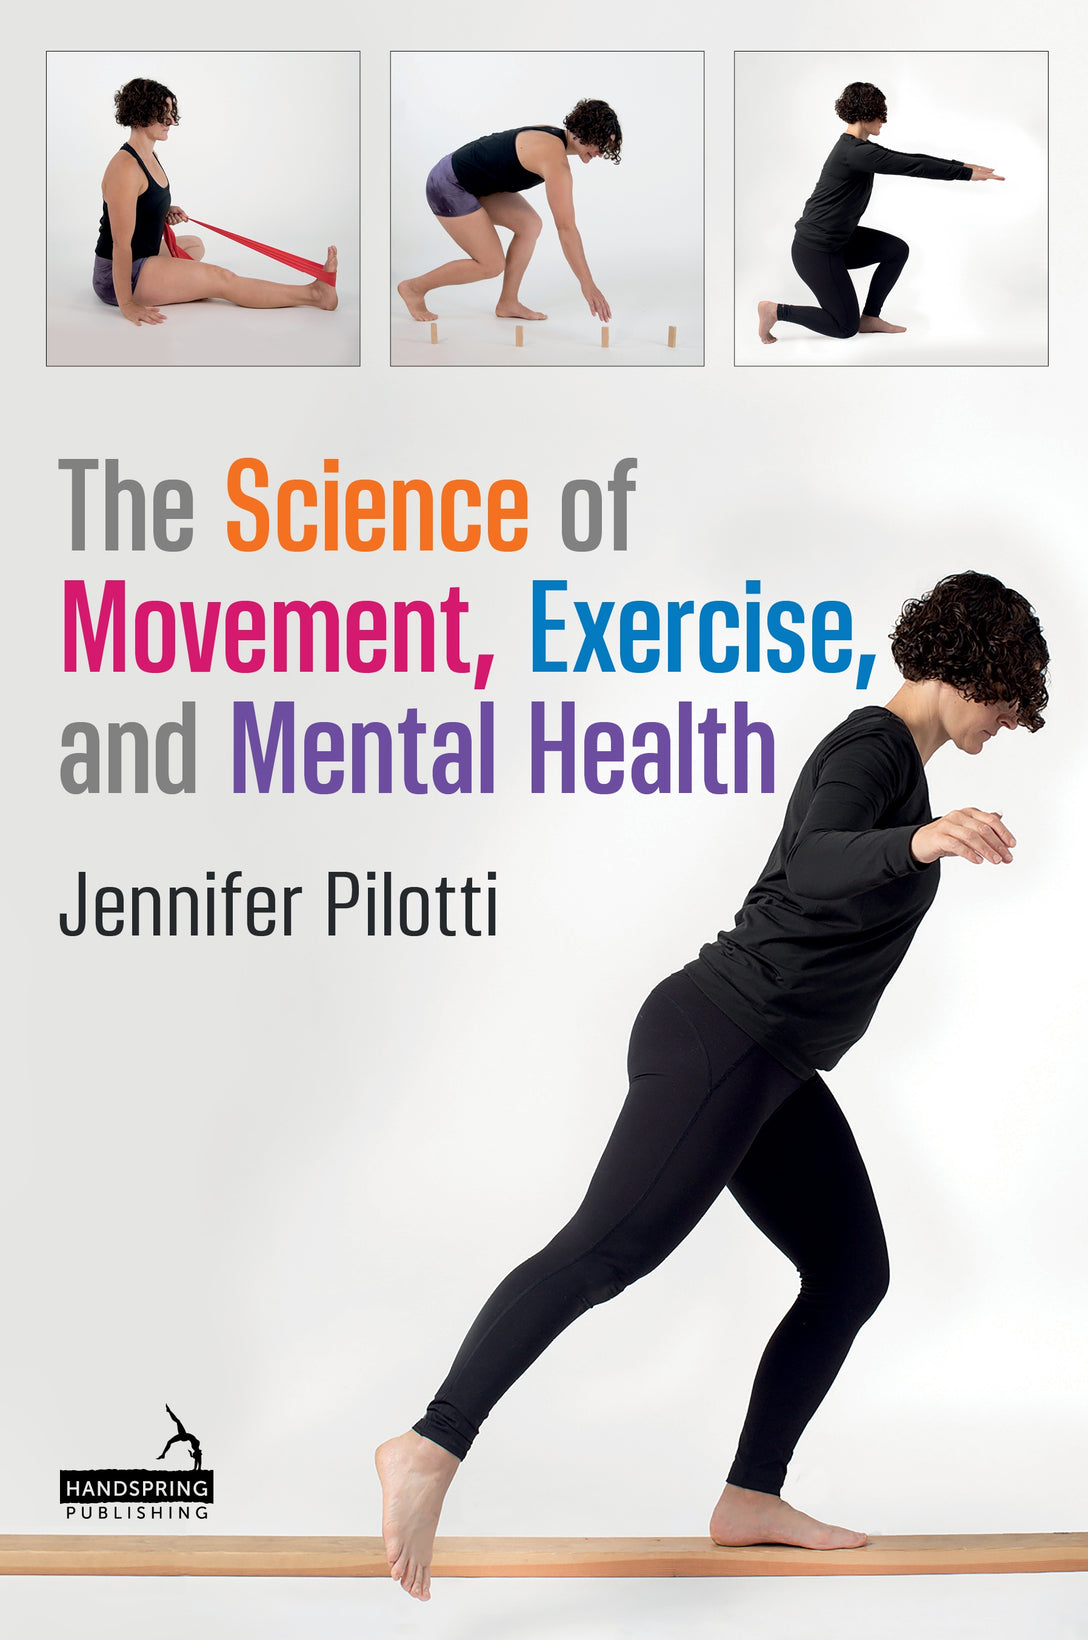 The Science of Movement, Exercise, and Mental Health by Jennifer Pilotti